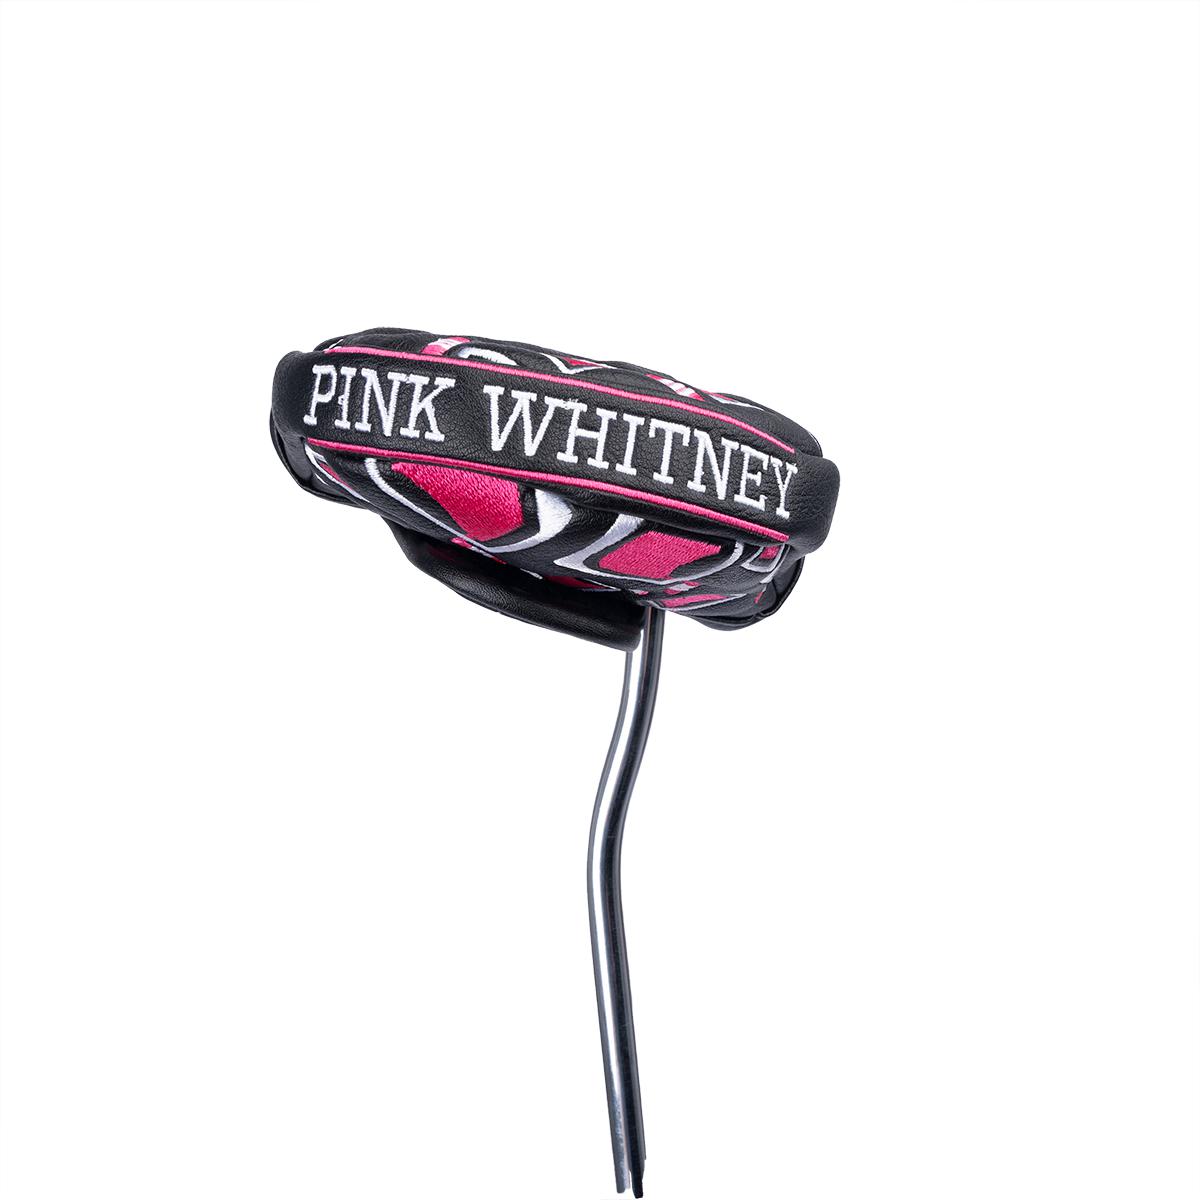 Pink Whitney Mallet Putter Cover-Golf Accessories-Pink Whitney-Black-One Size-Barstool Sports